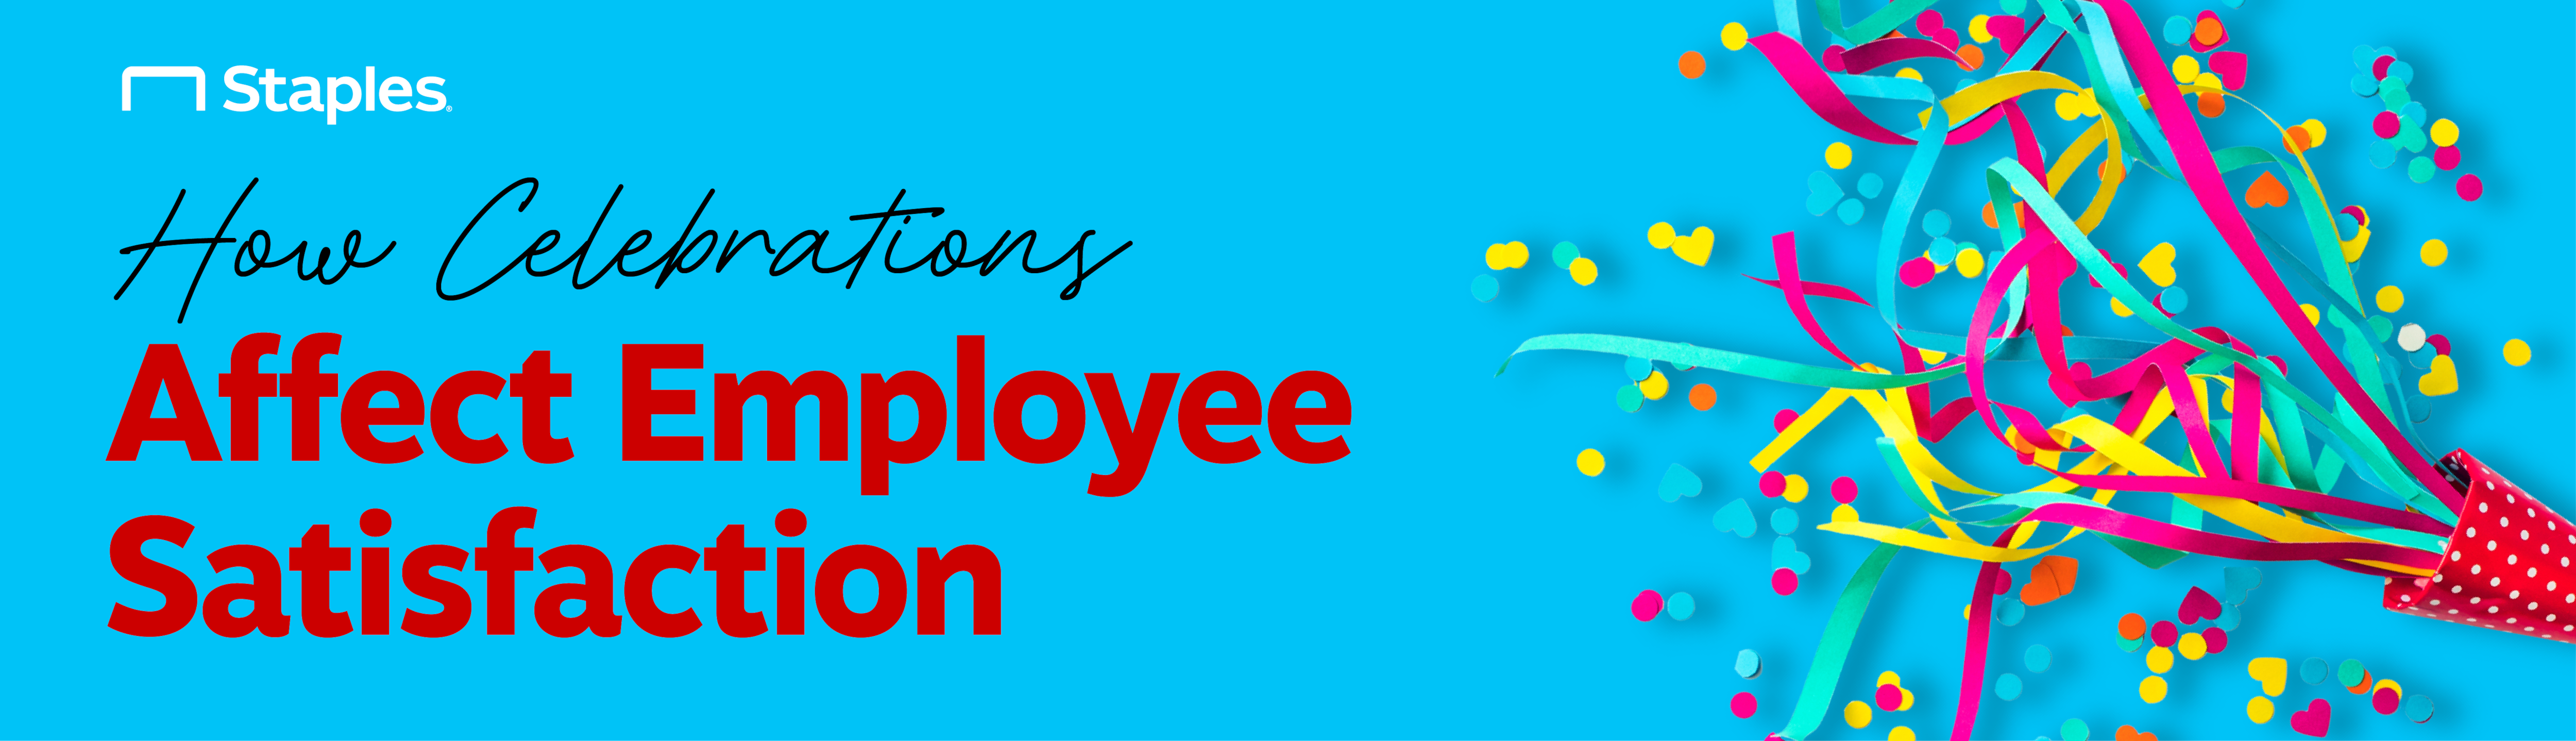 How Celebrations Affect Employee Satisfaction Thumbnail